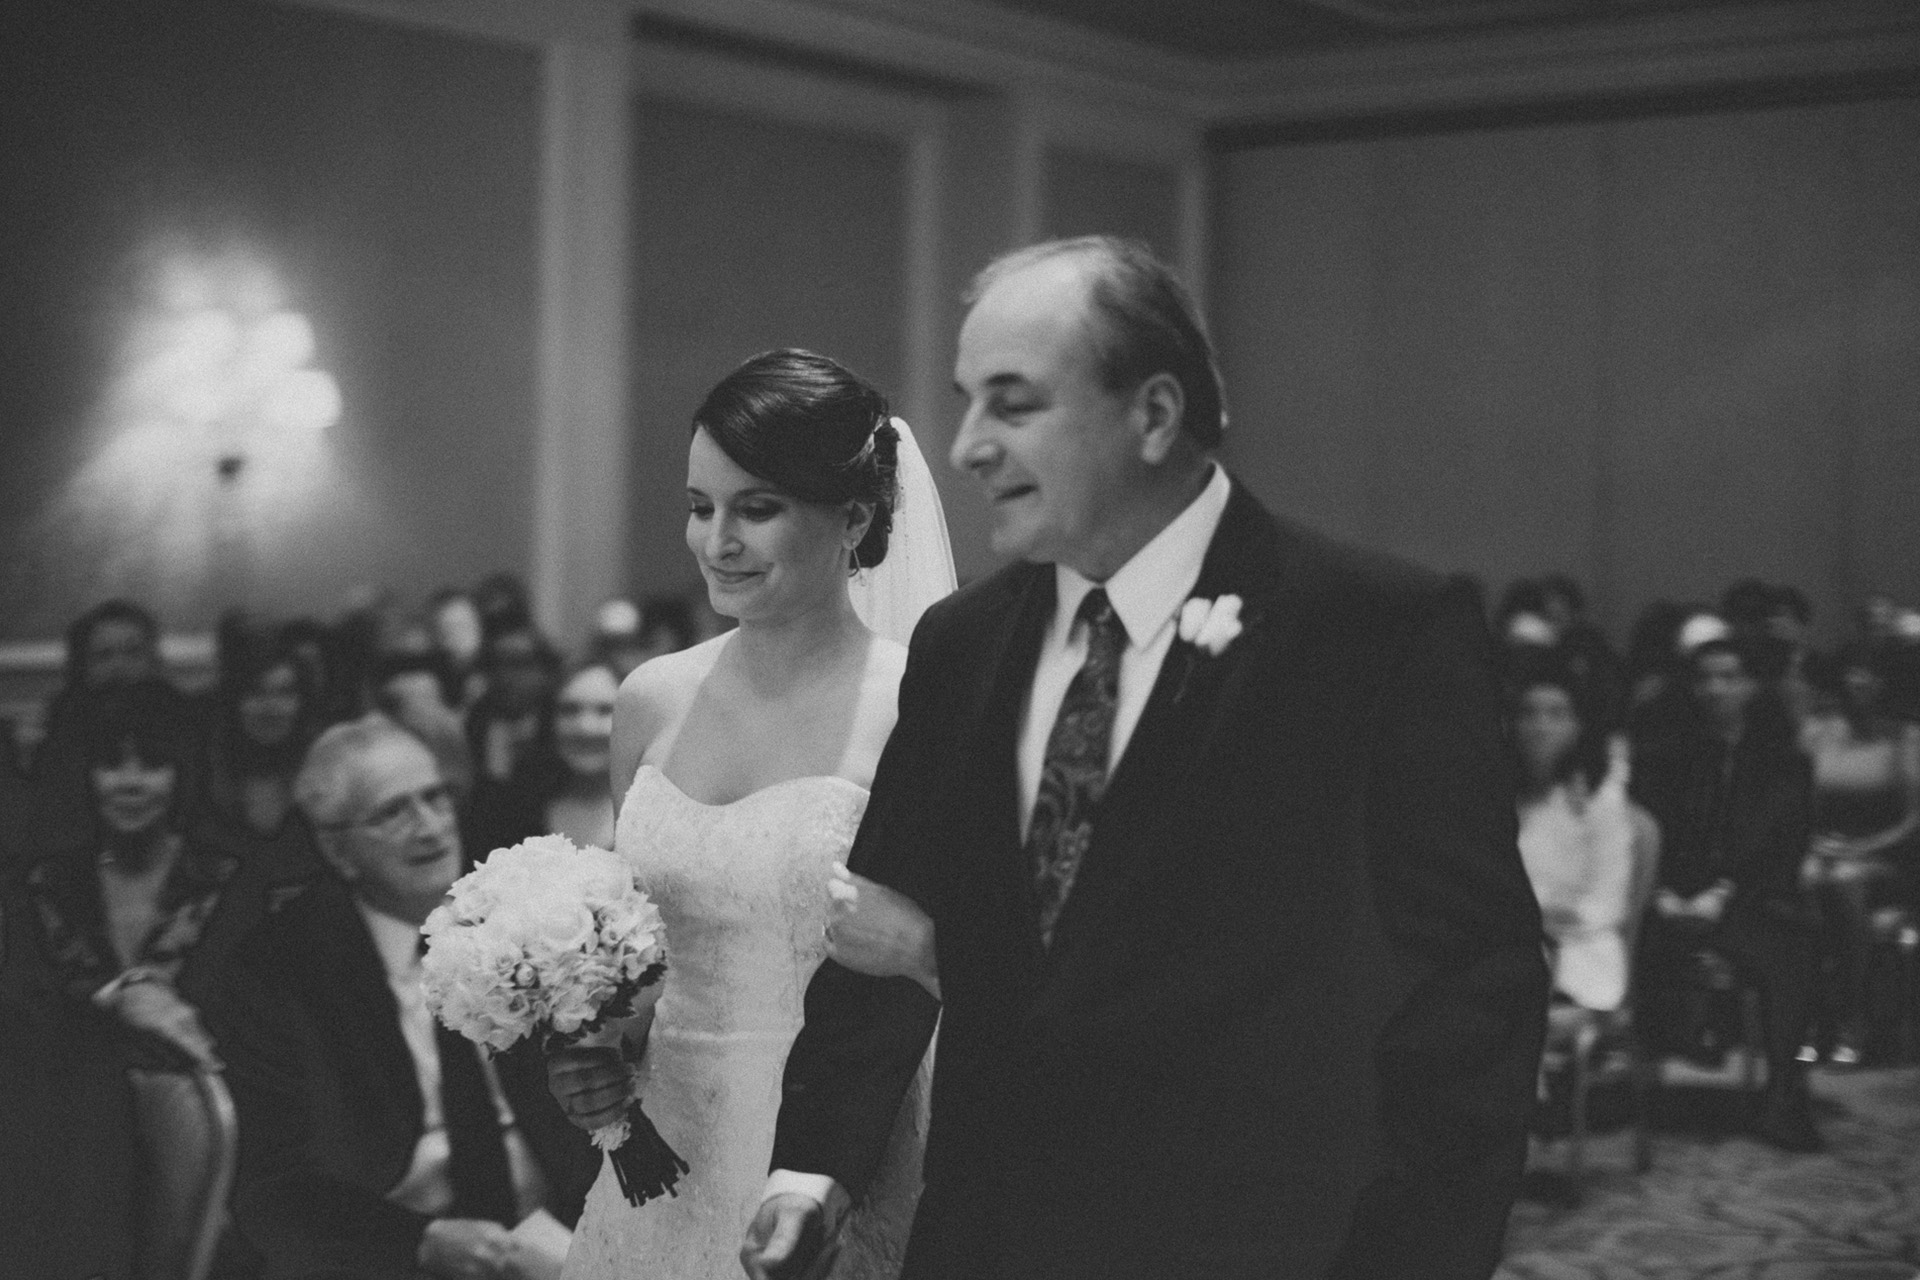 Cleveland Wedding at the Ritz Carlton Hotel - Too Much Awesomeness Photographer 15.jpg